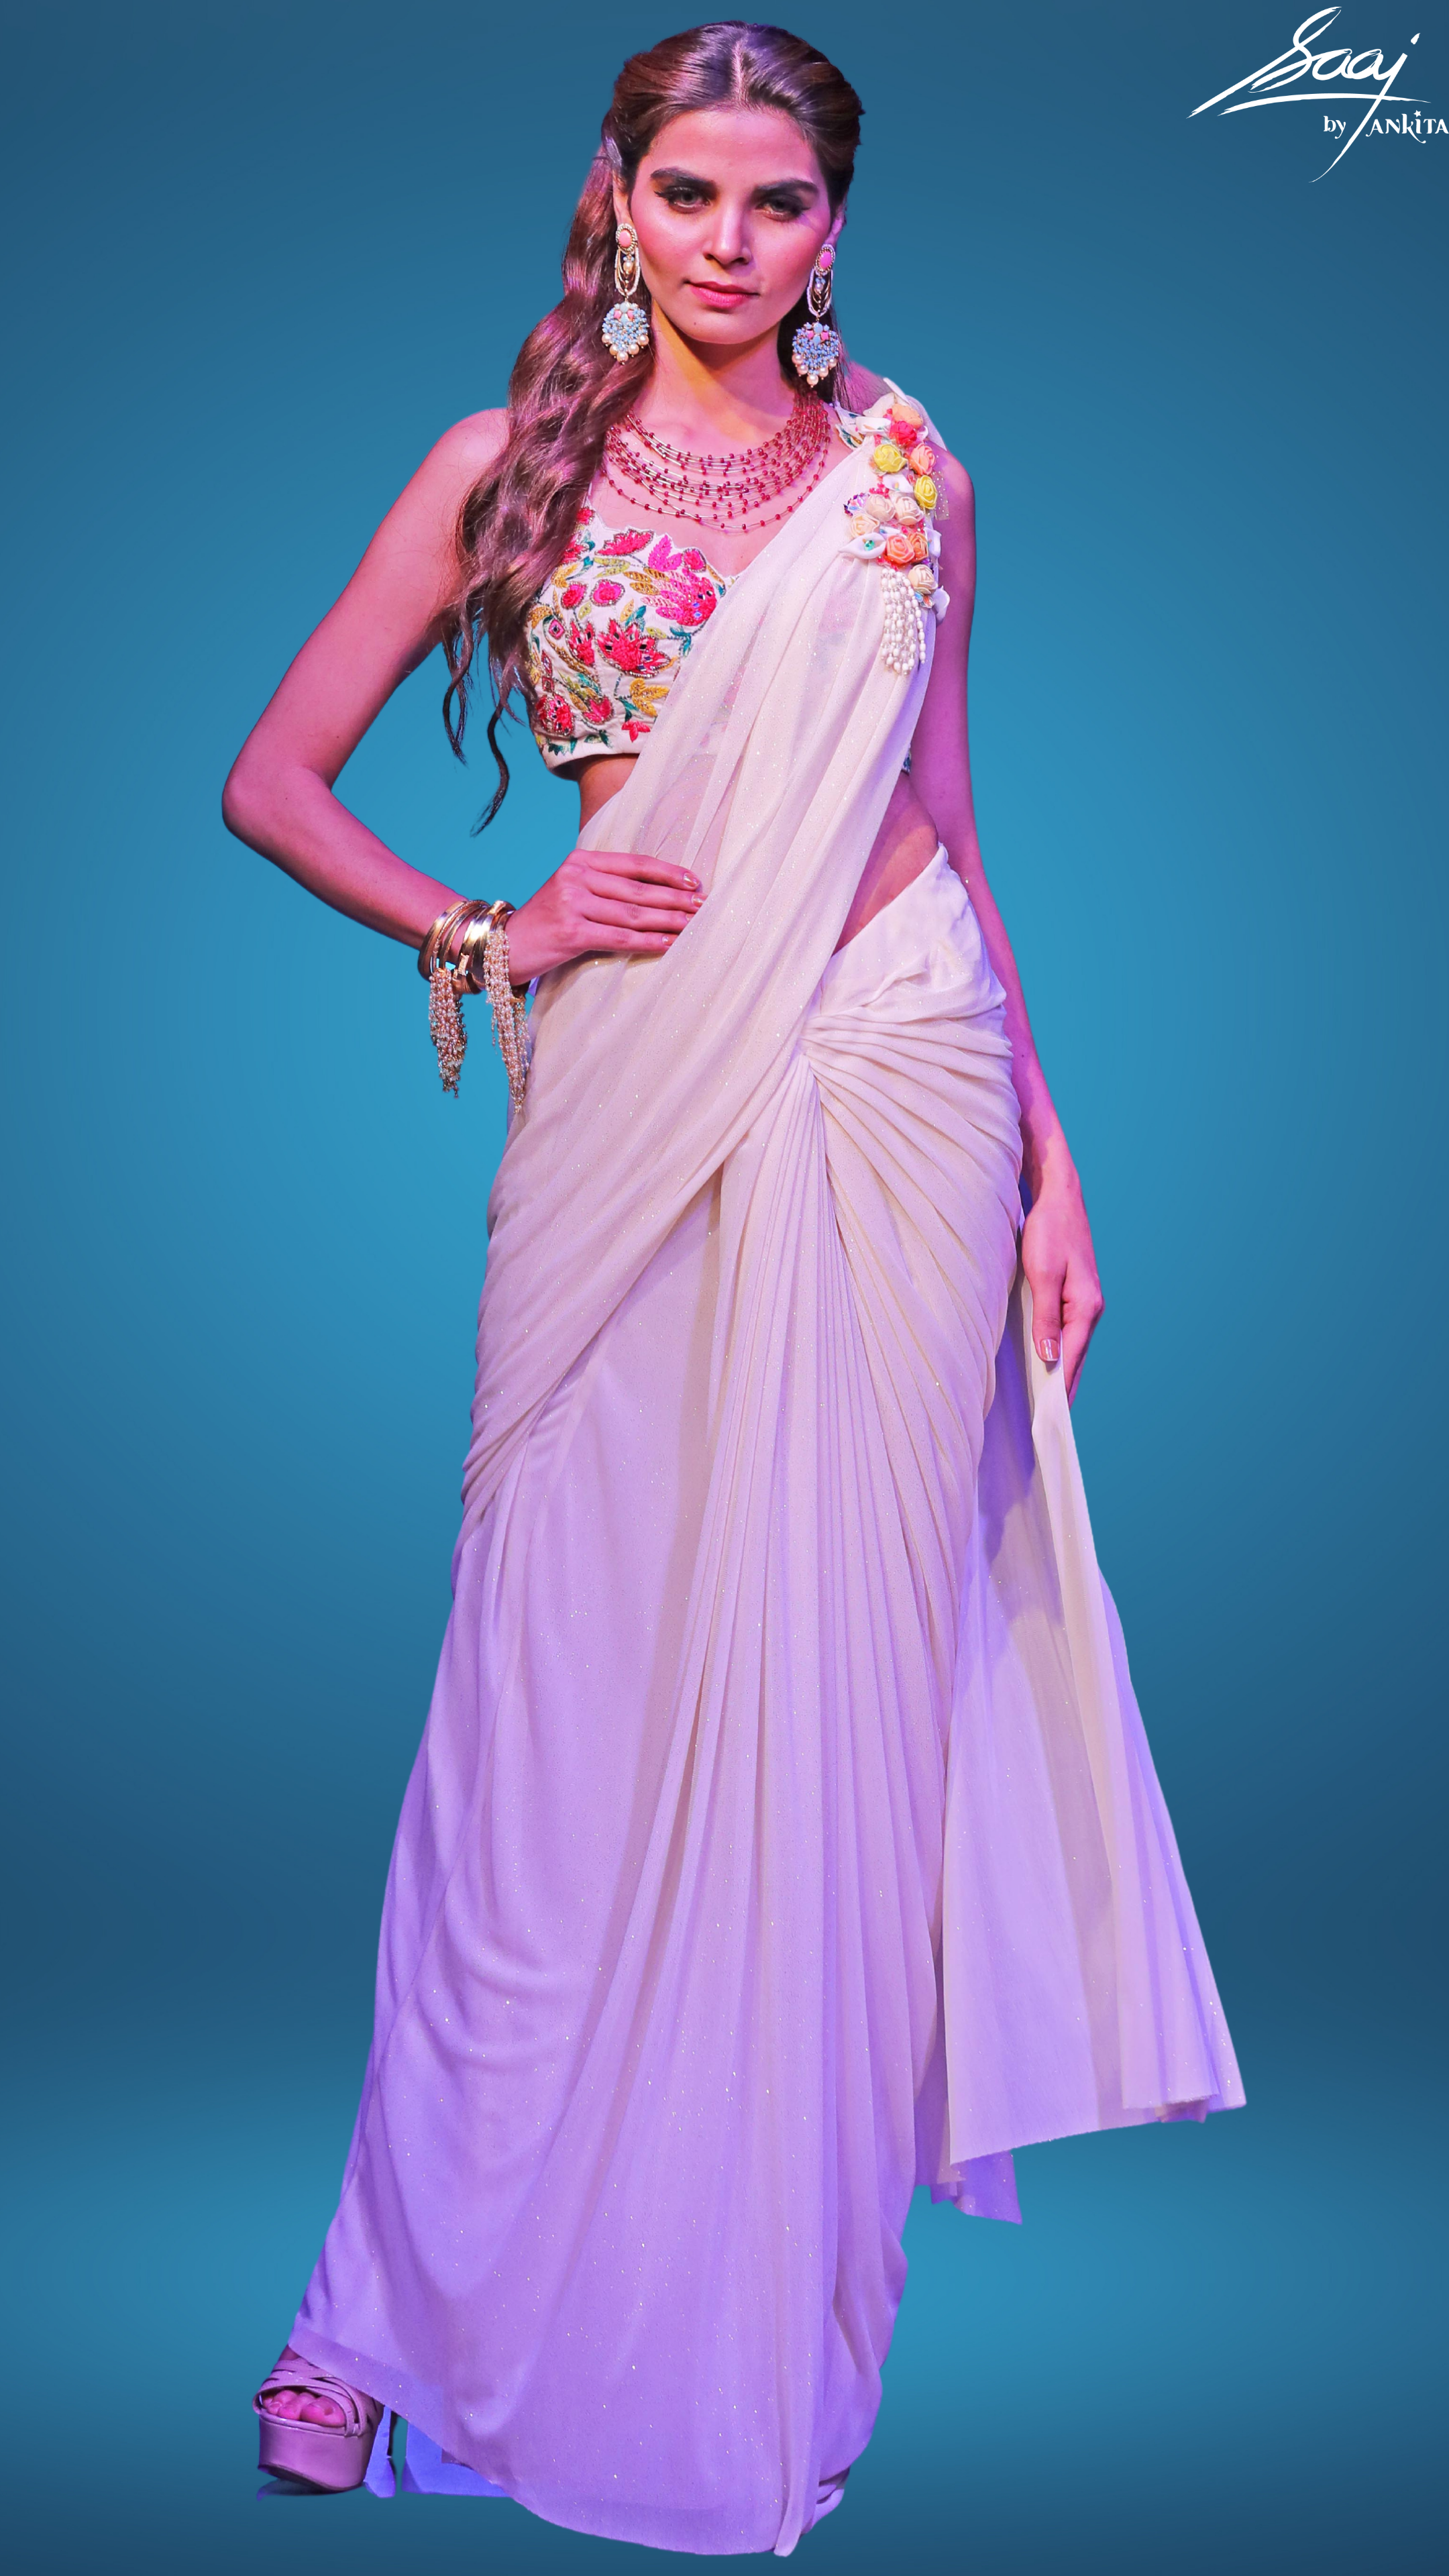 Glittery Jersey Pre-Draped Saree with Floral Blouse - Saaj By Ankita